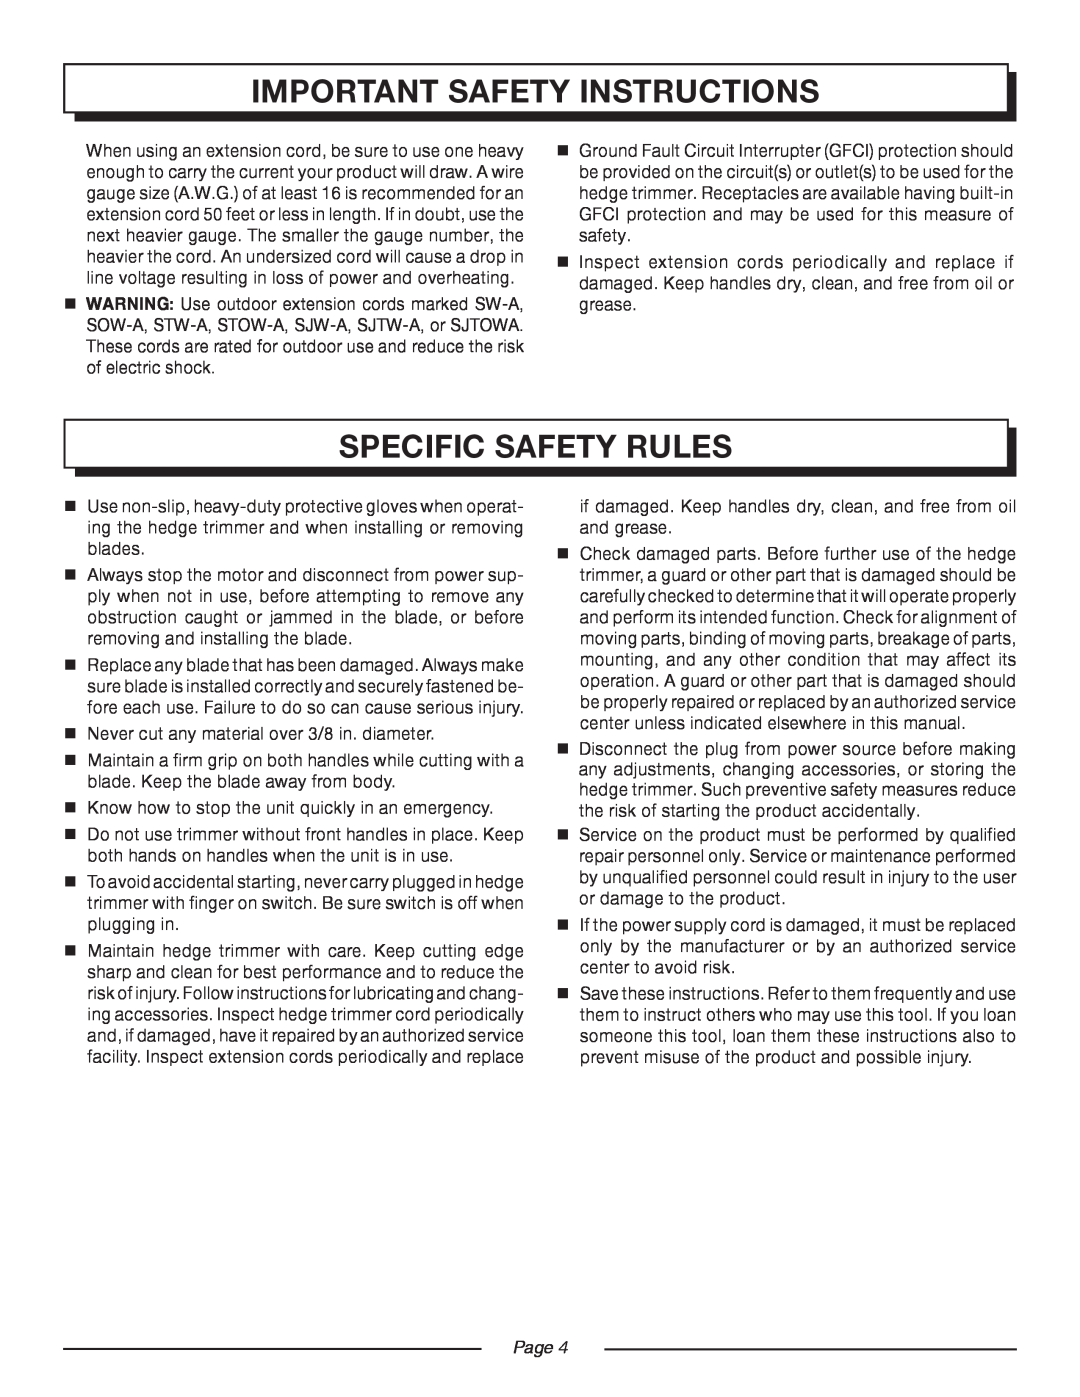 Homelite UT 44100 Specific Safety Rules, important safety instructions,  Never cut any material over 3/8 in. diameter 